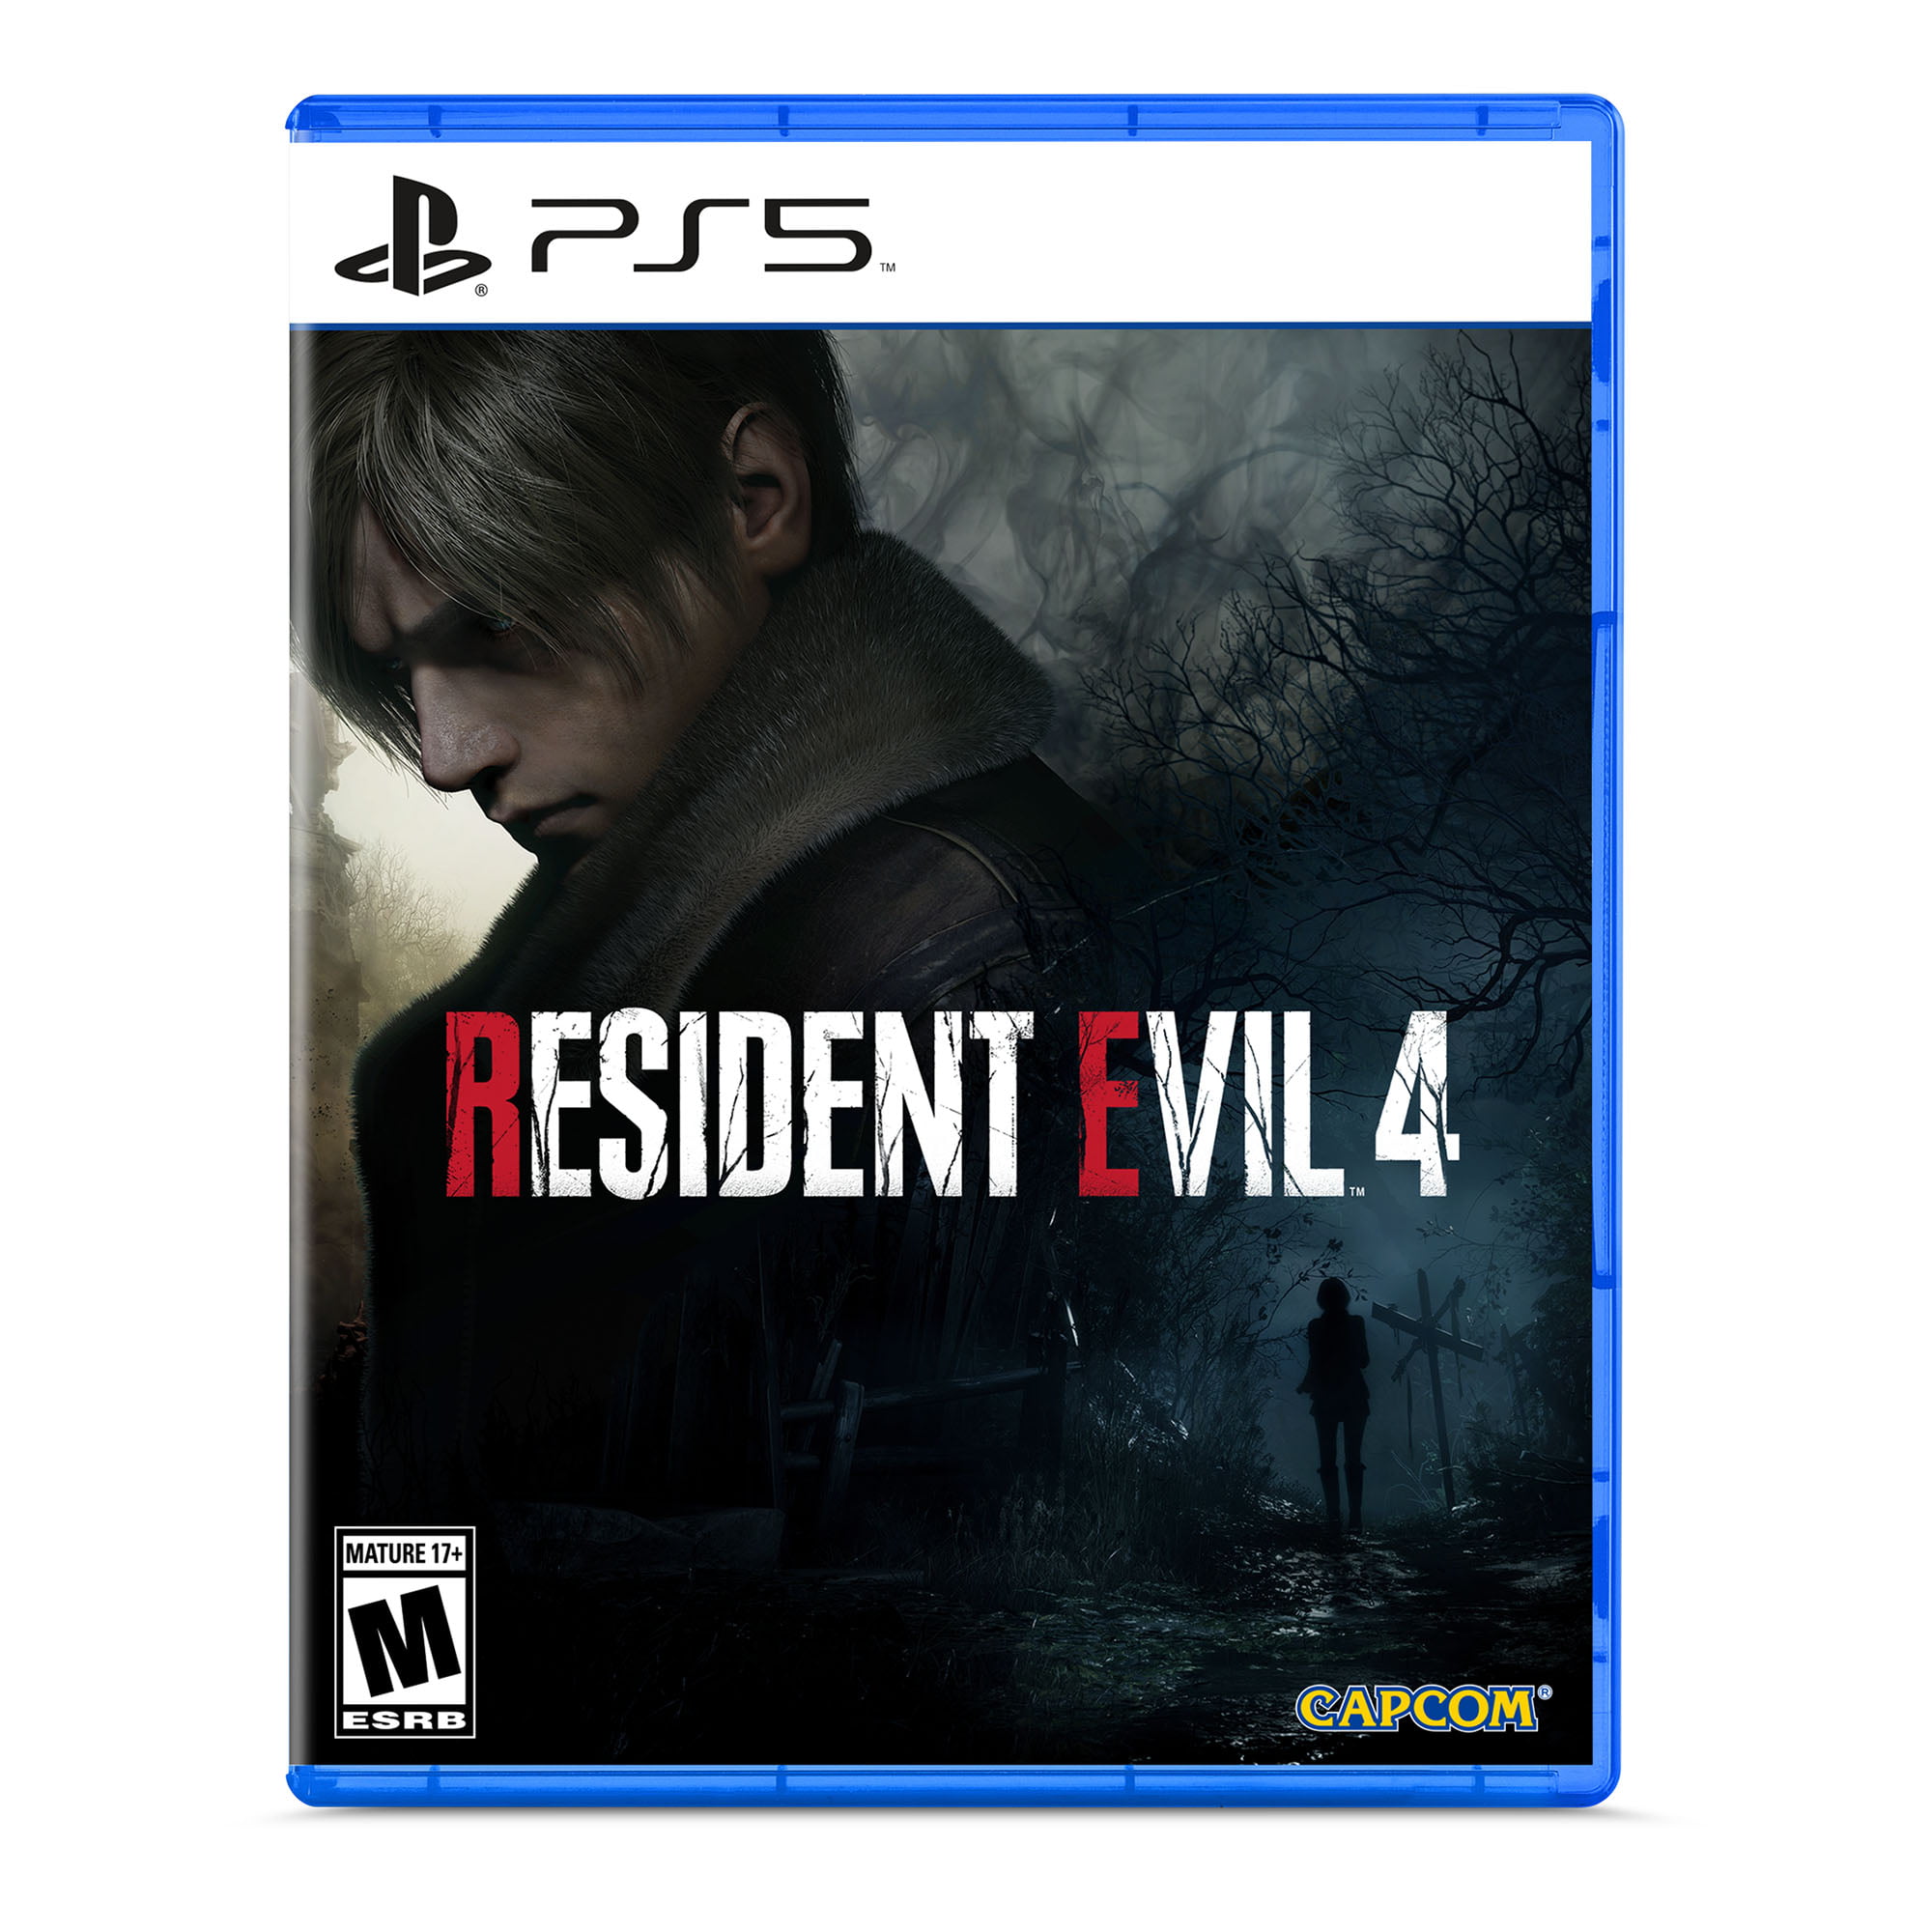 Resident Evil 4: Remake Pre-Order (Playstation 5 or Xbox Series X) $33.32